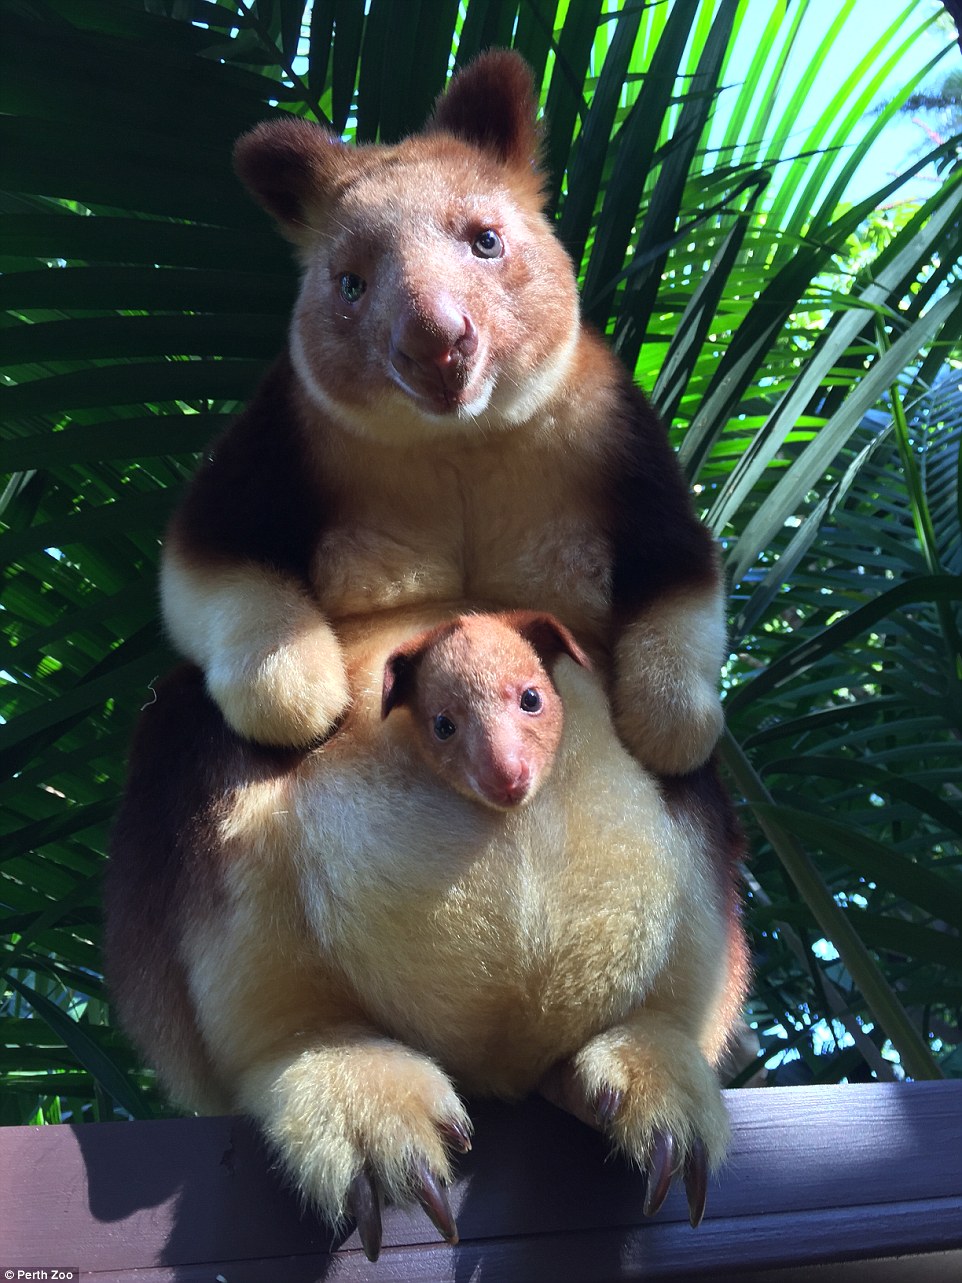 Tree Kangaroo Backgrounds, Compatible - PC, Mobile, Gadgets| 962x1283 px